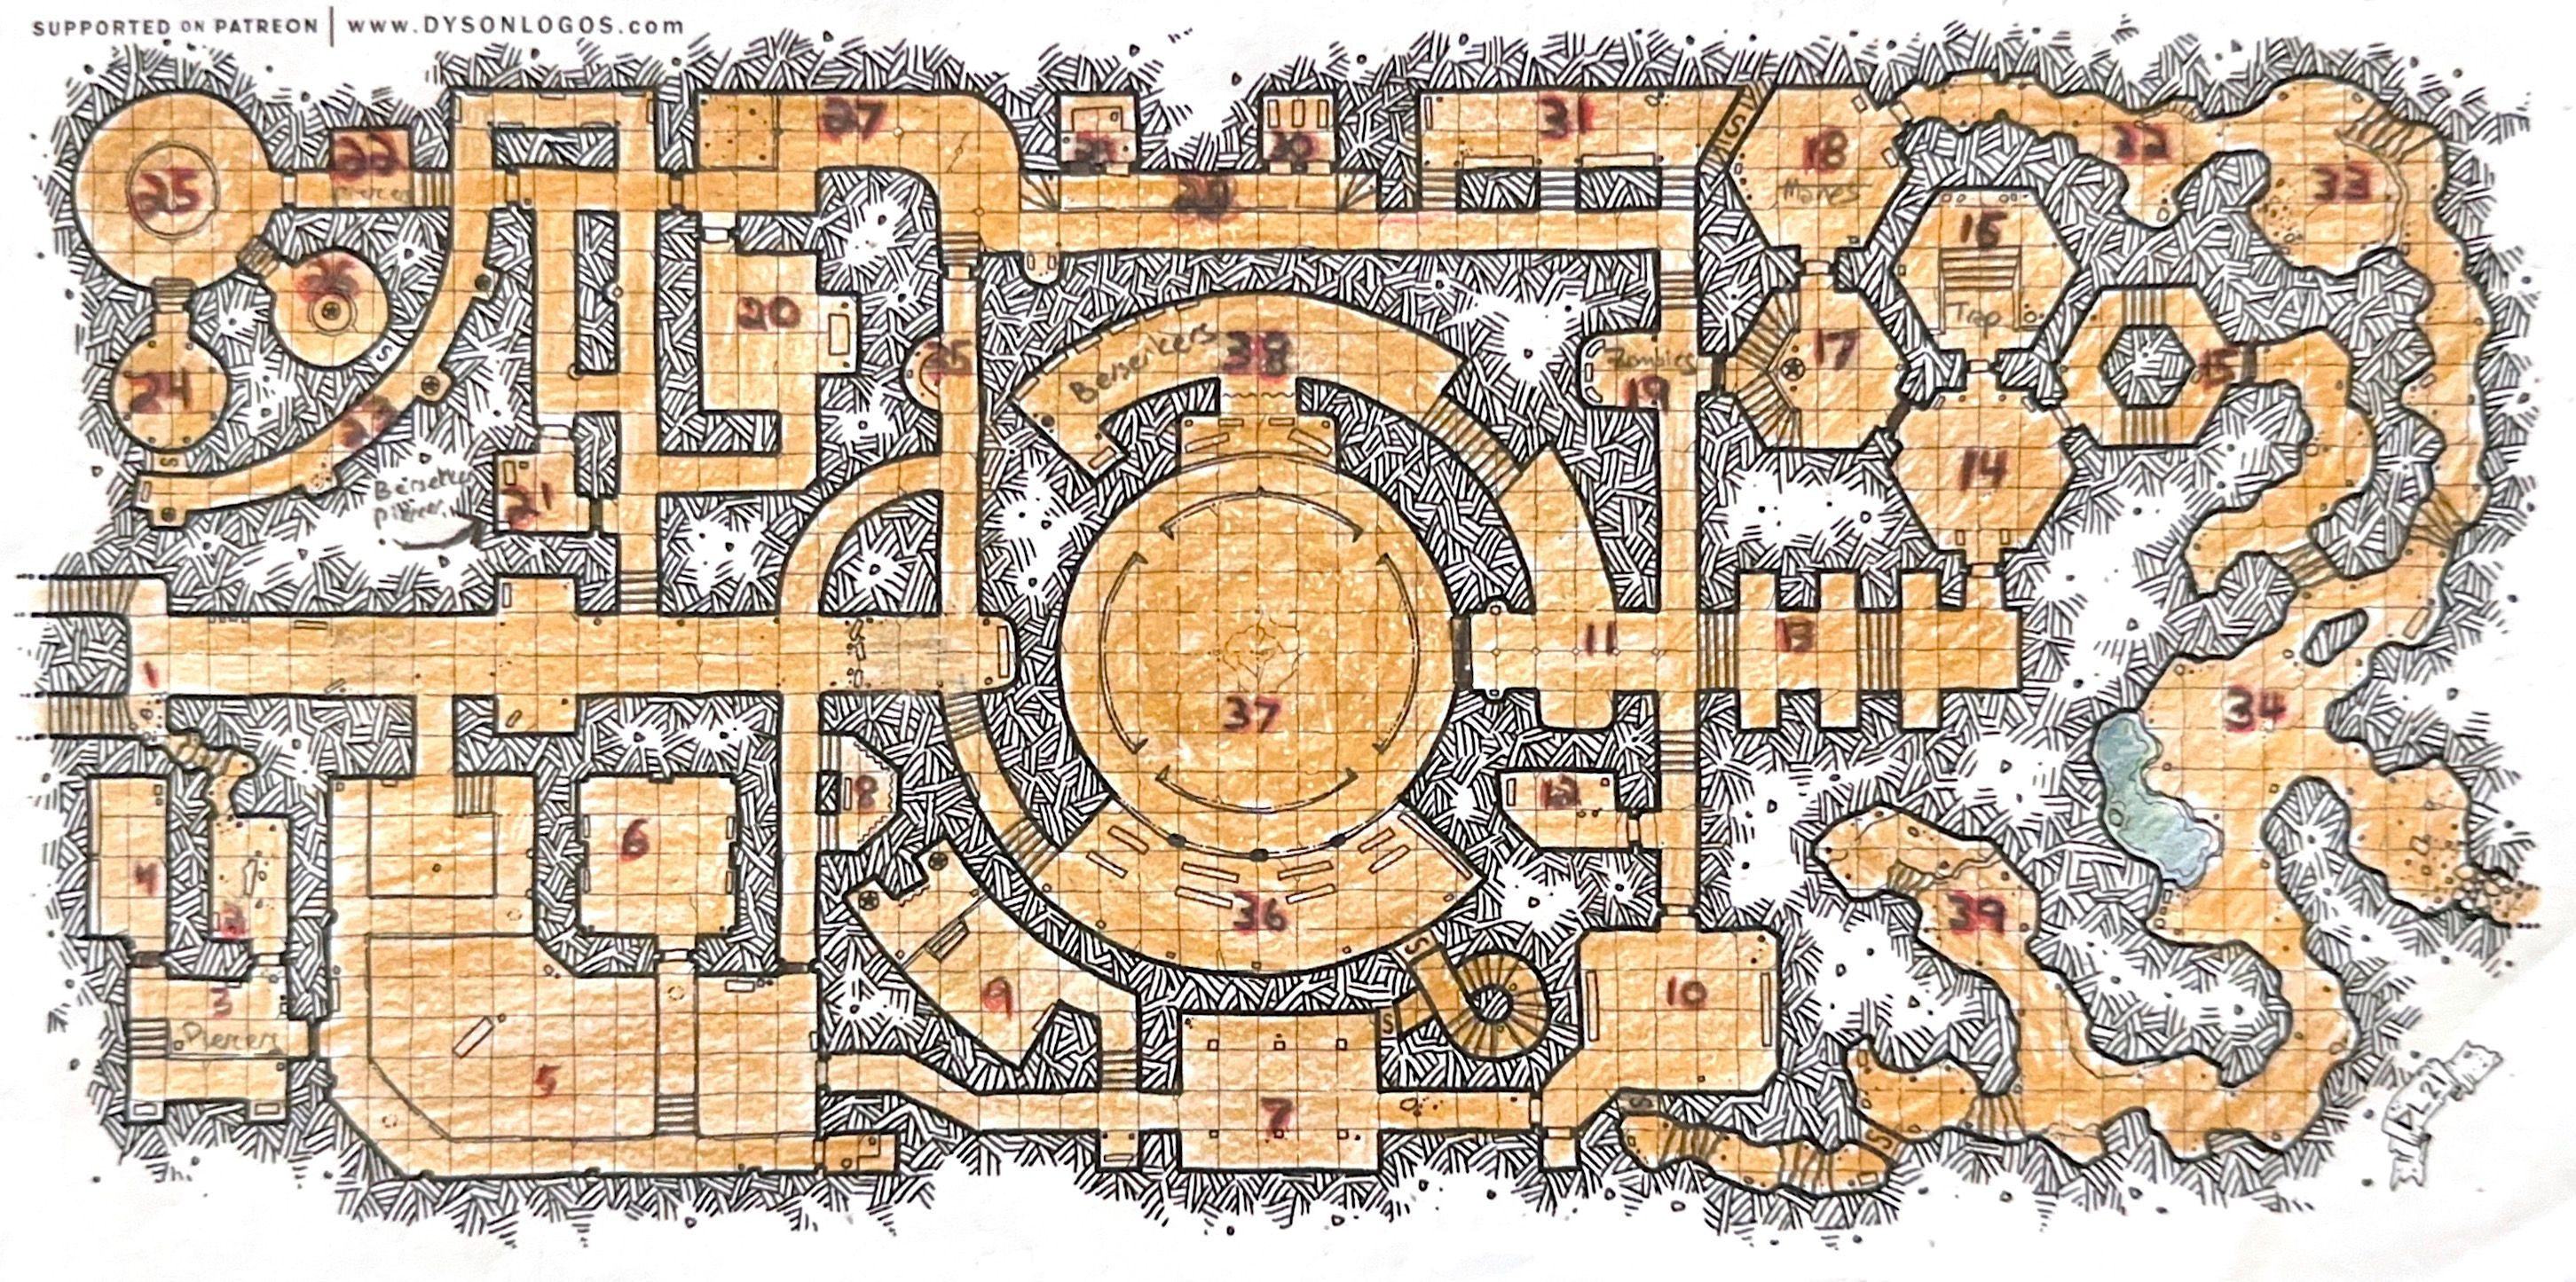 Completed map of the Cryptorum